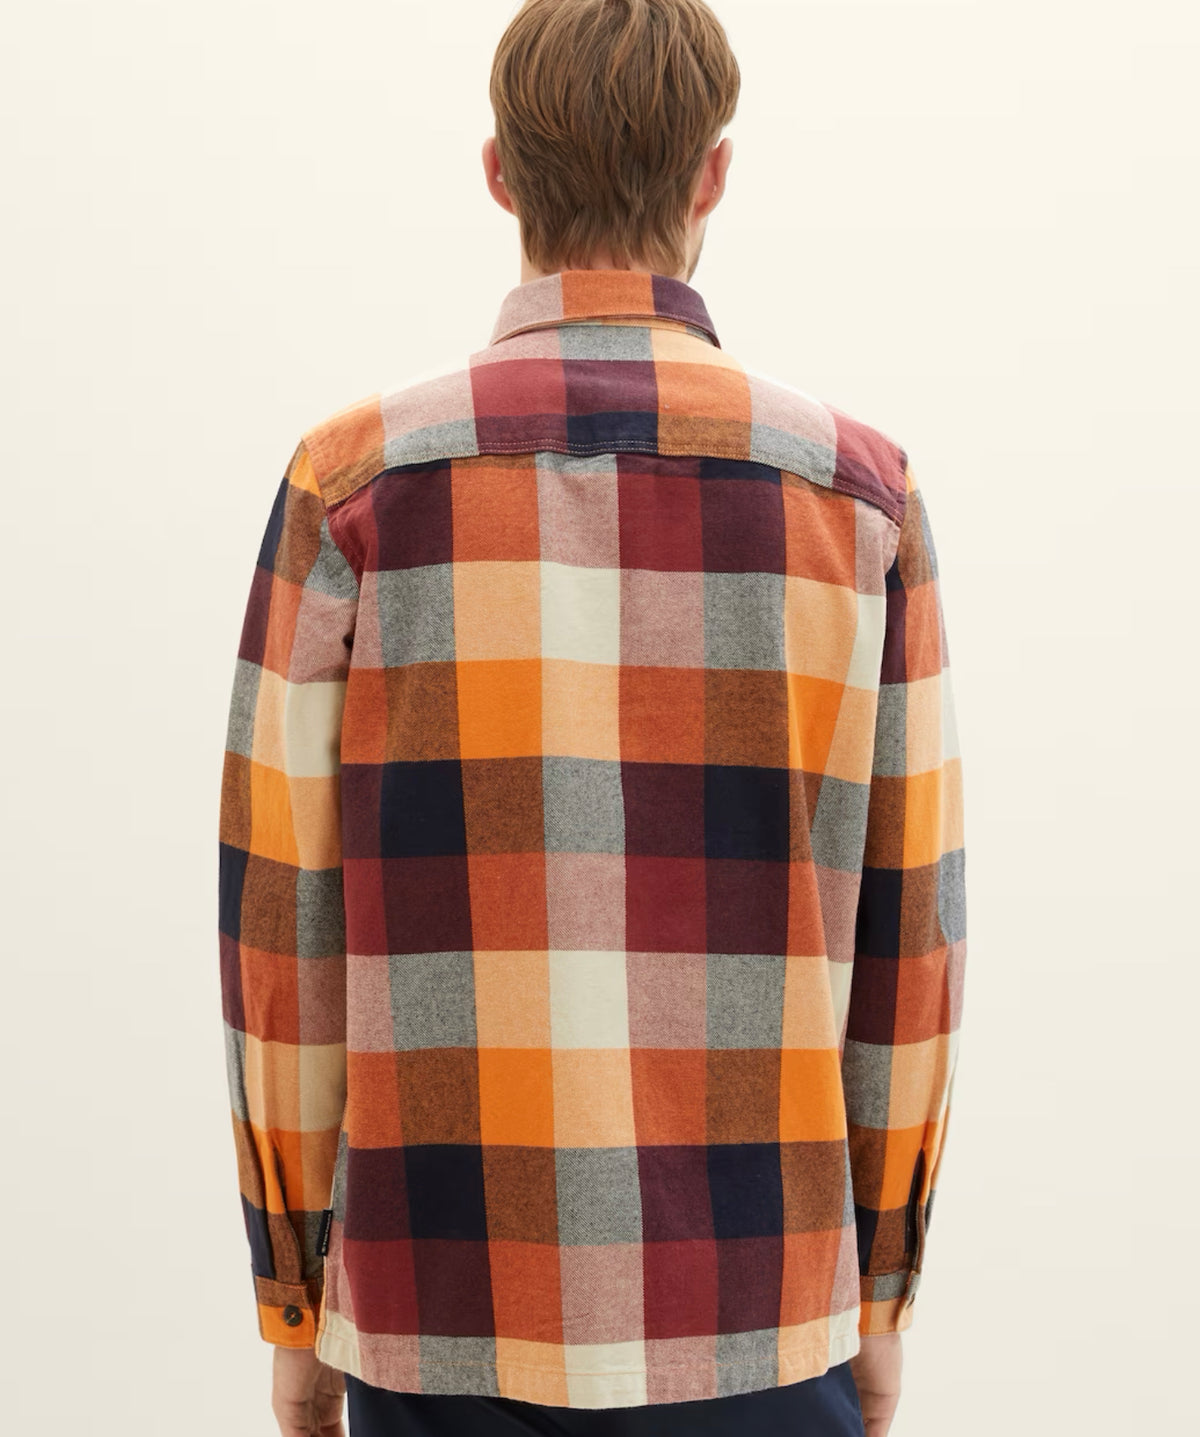 Colourful Checked Shirt